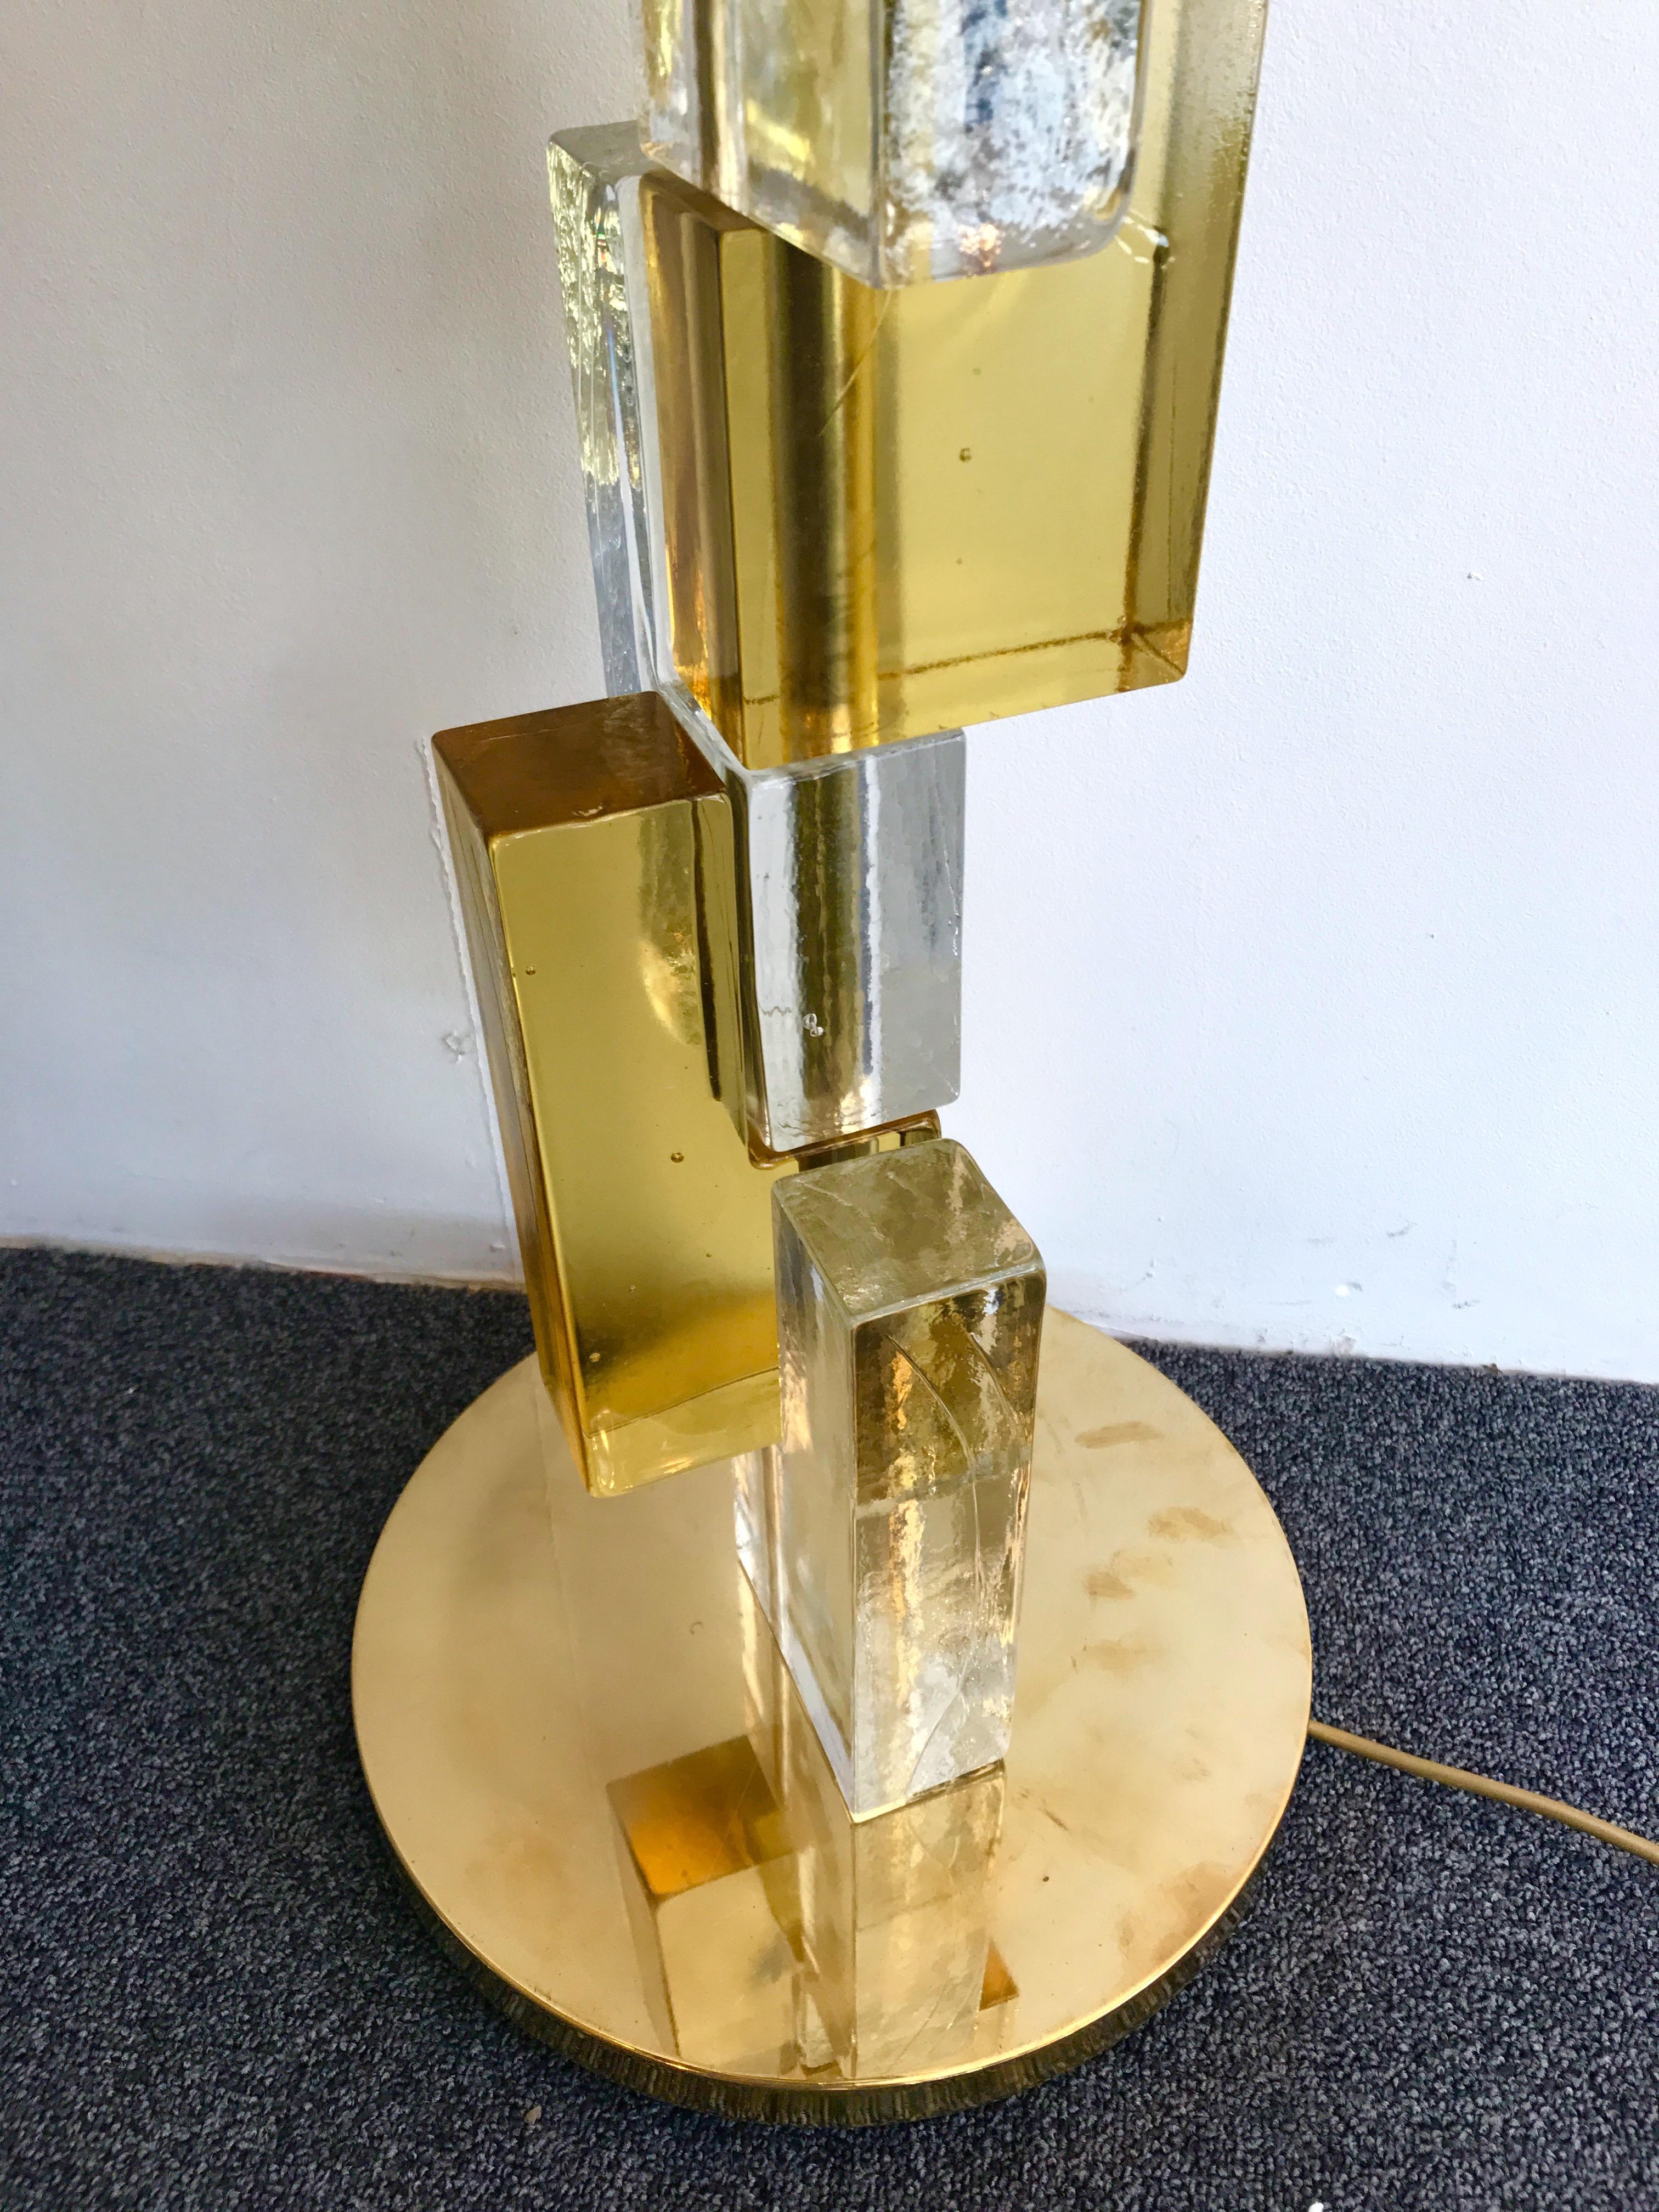 Huge cubic floor lamp in contemporary Murano pressed glass. Very quality glass block construction. Possible to make a pair. In the manner of Poliarte, Mazzega, Carlo Nason, Venini, Vistosi, La Murrina.

Brass lampshade not included, on order.
PRICE